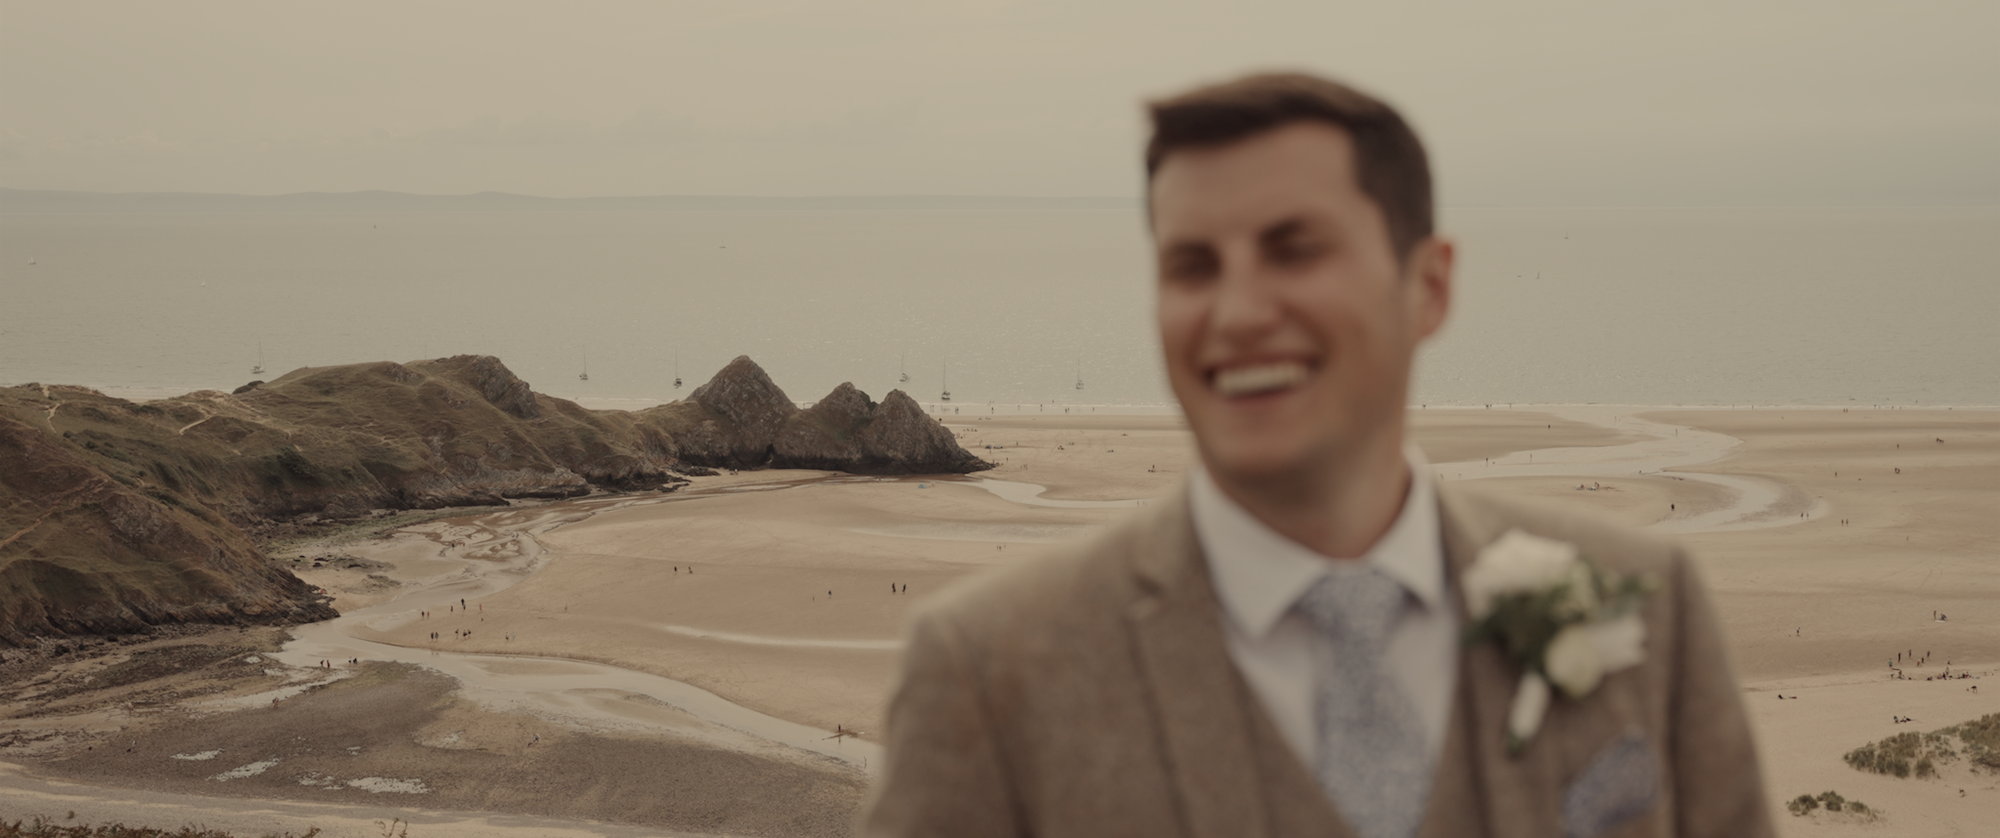 Oxwich Bay Hotel Wedding Videography by Ben Holbrook Films (Swansea South Wales).jpeg27.png